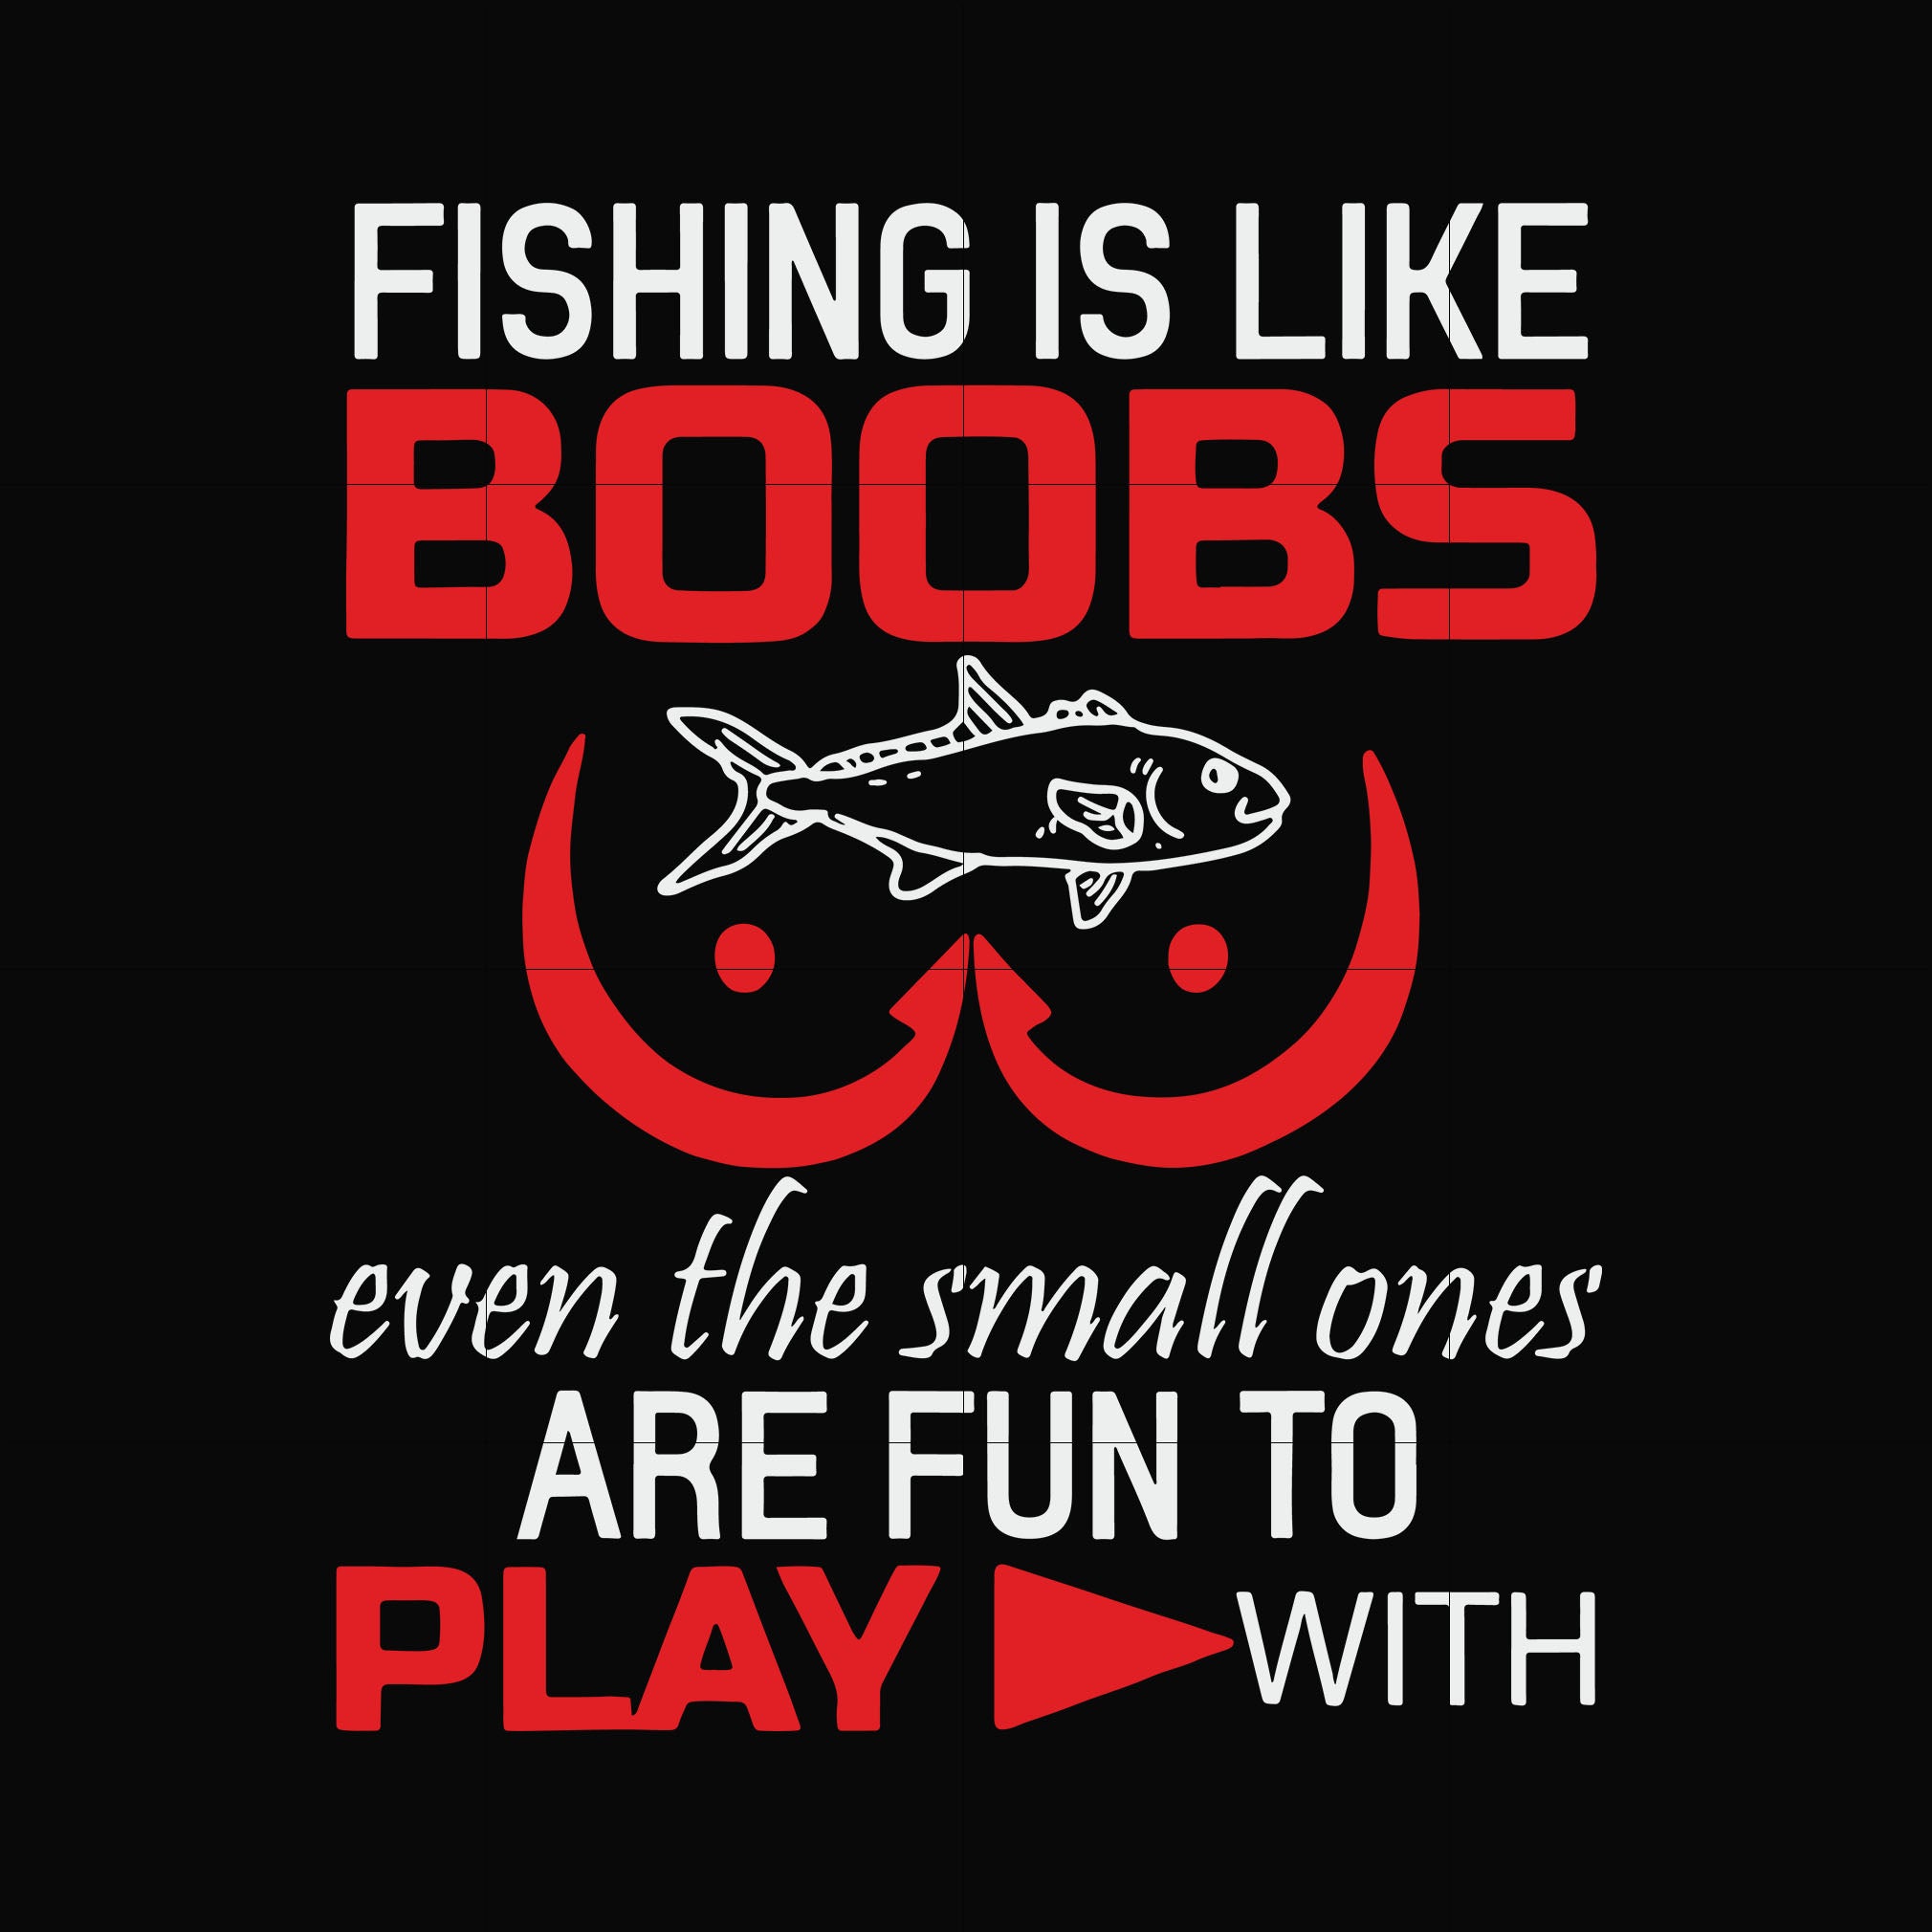 Fishing is like boobs even the small ones are fun to play with svg